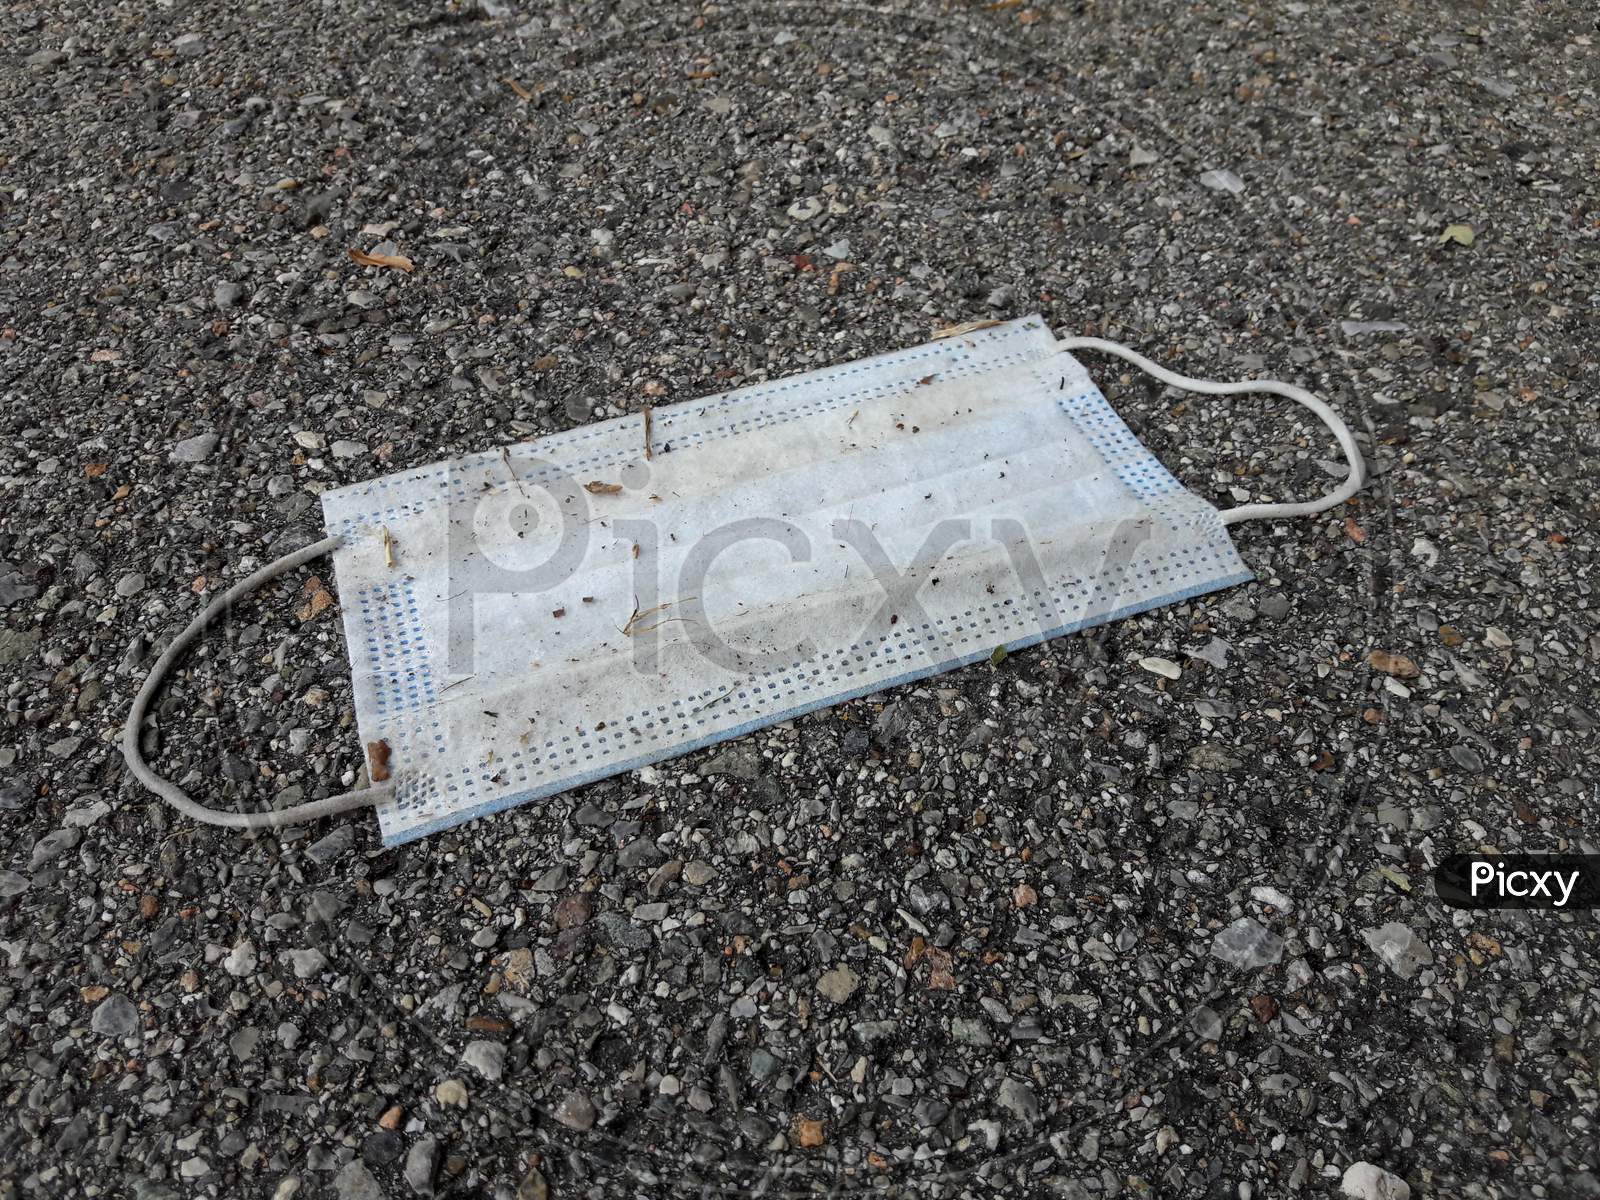 A Used Surgical Mask Dumped On Sidewalk